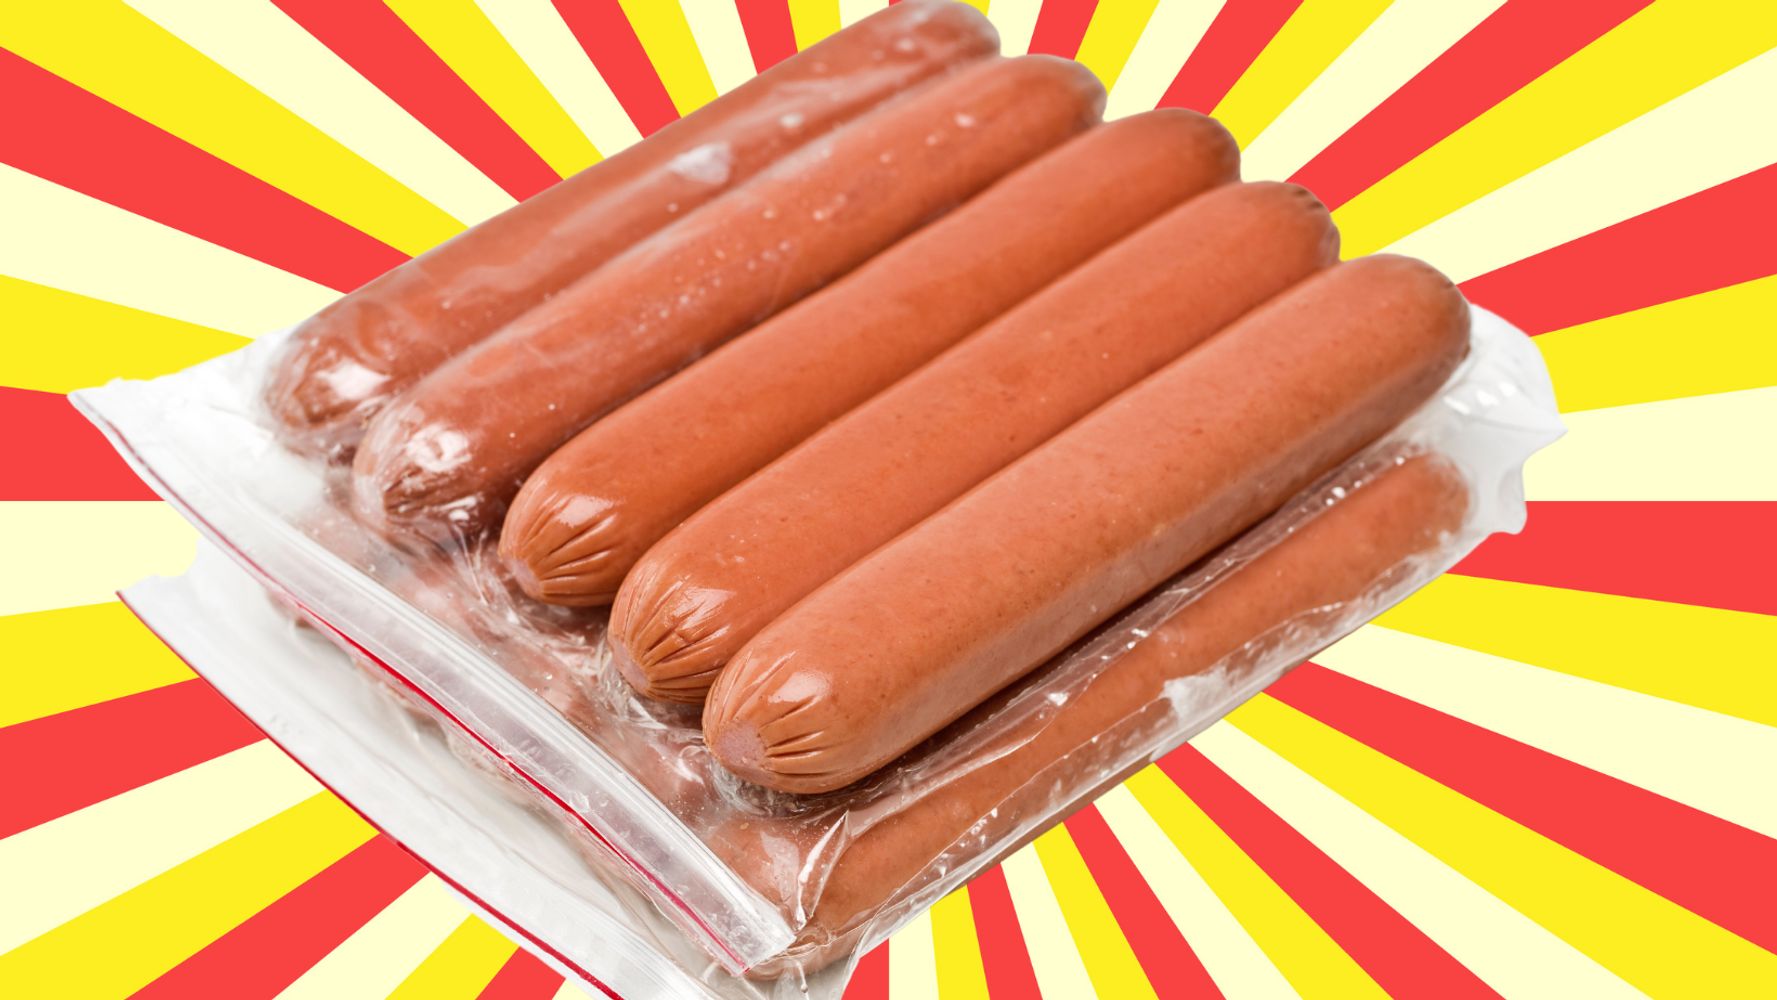 3 Best Turkey Hot Dogs to Buy, According to Our Taste Test